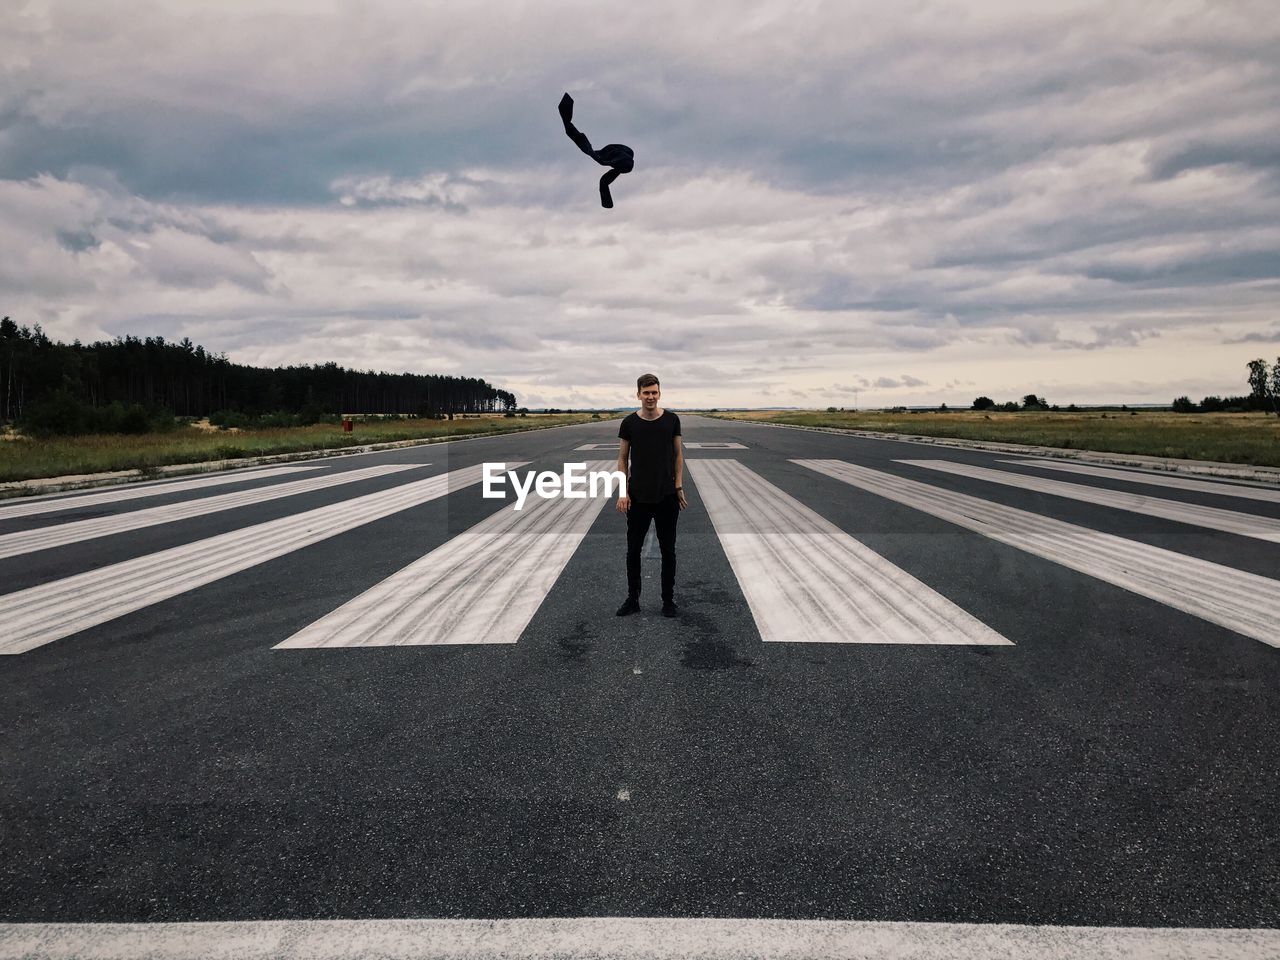 Man standing on airport runway against cloudy sky